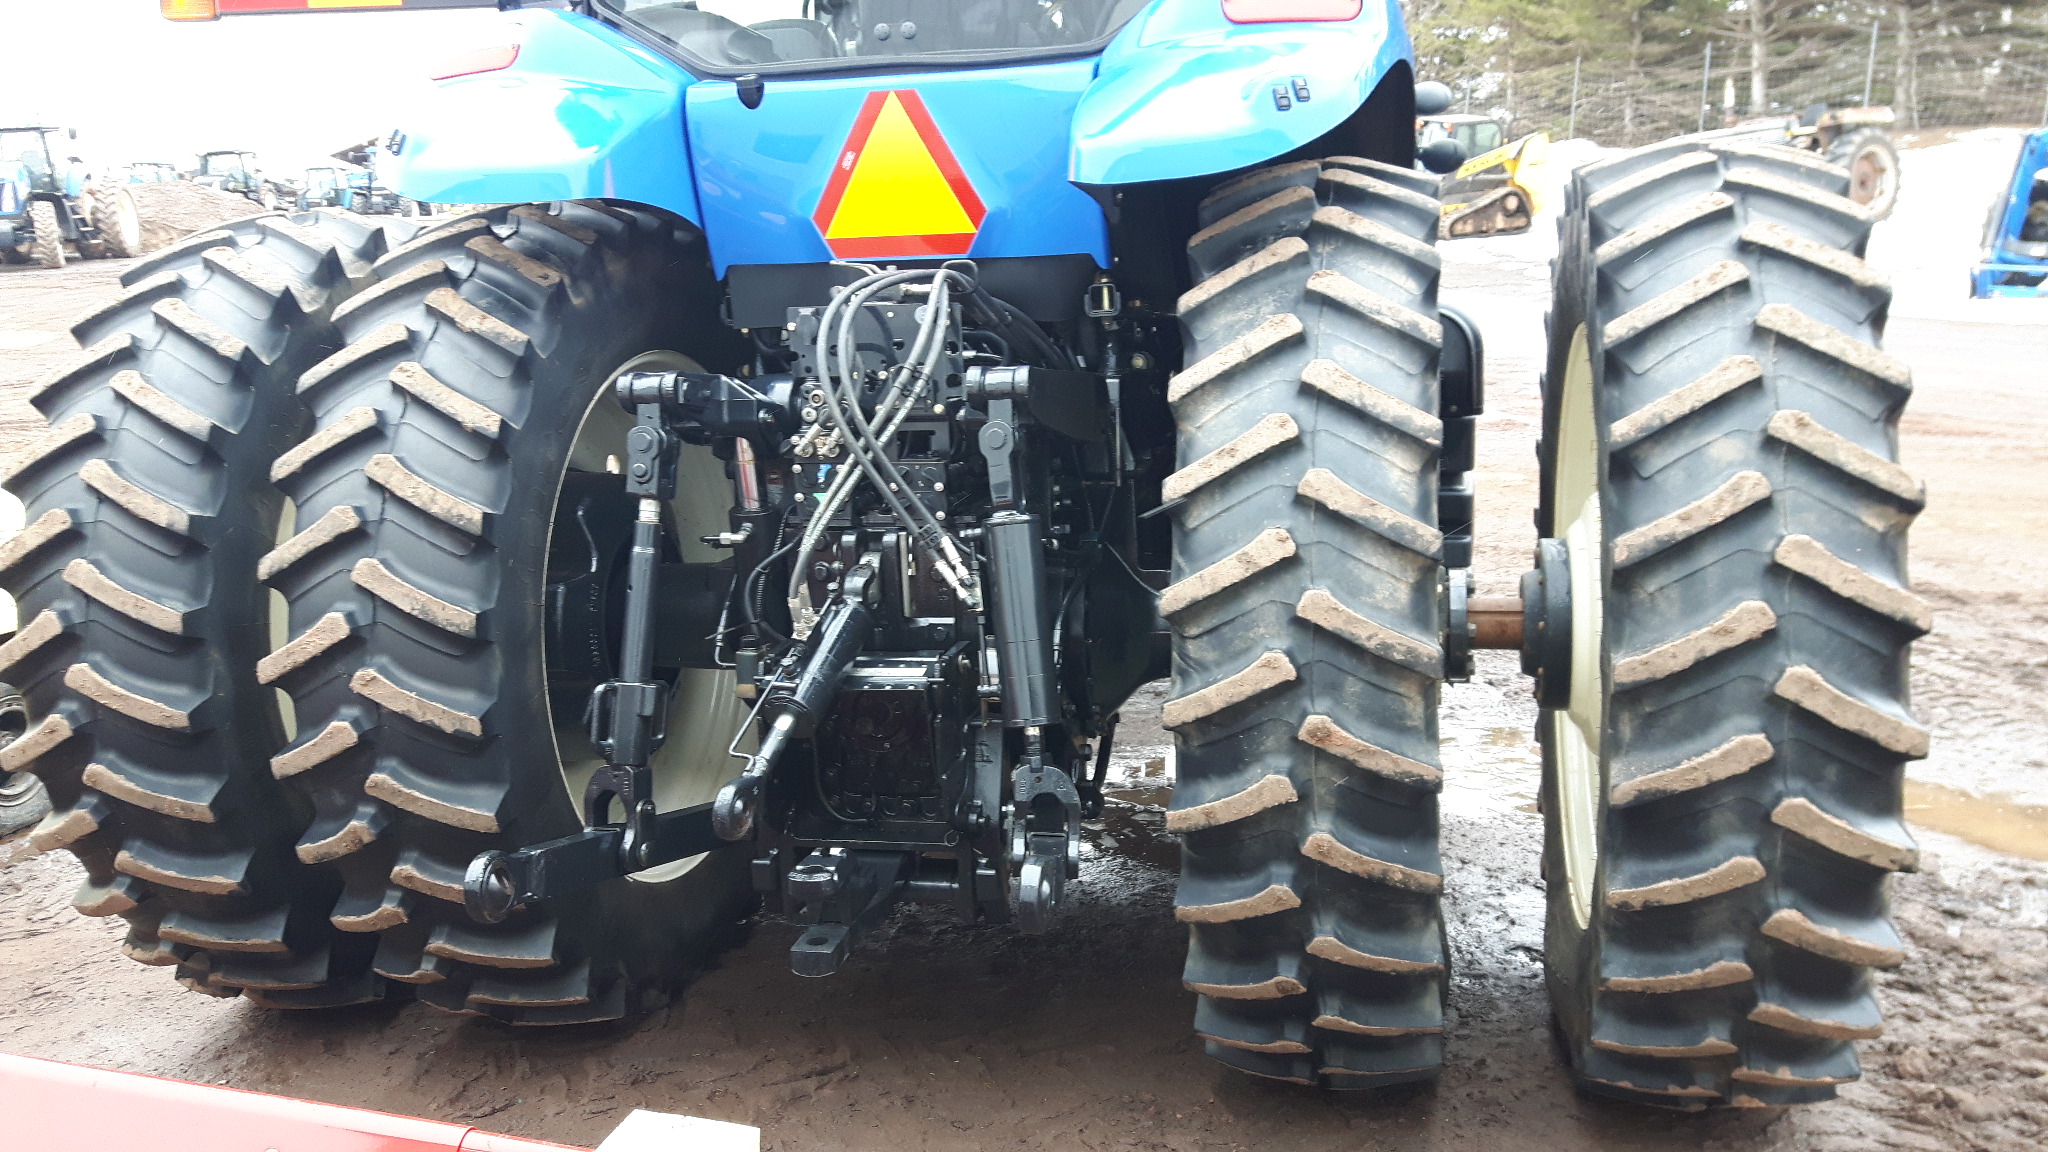 2012 New Holland T8.300 Tractor